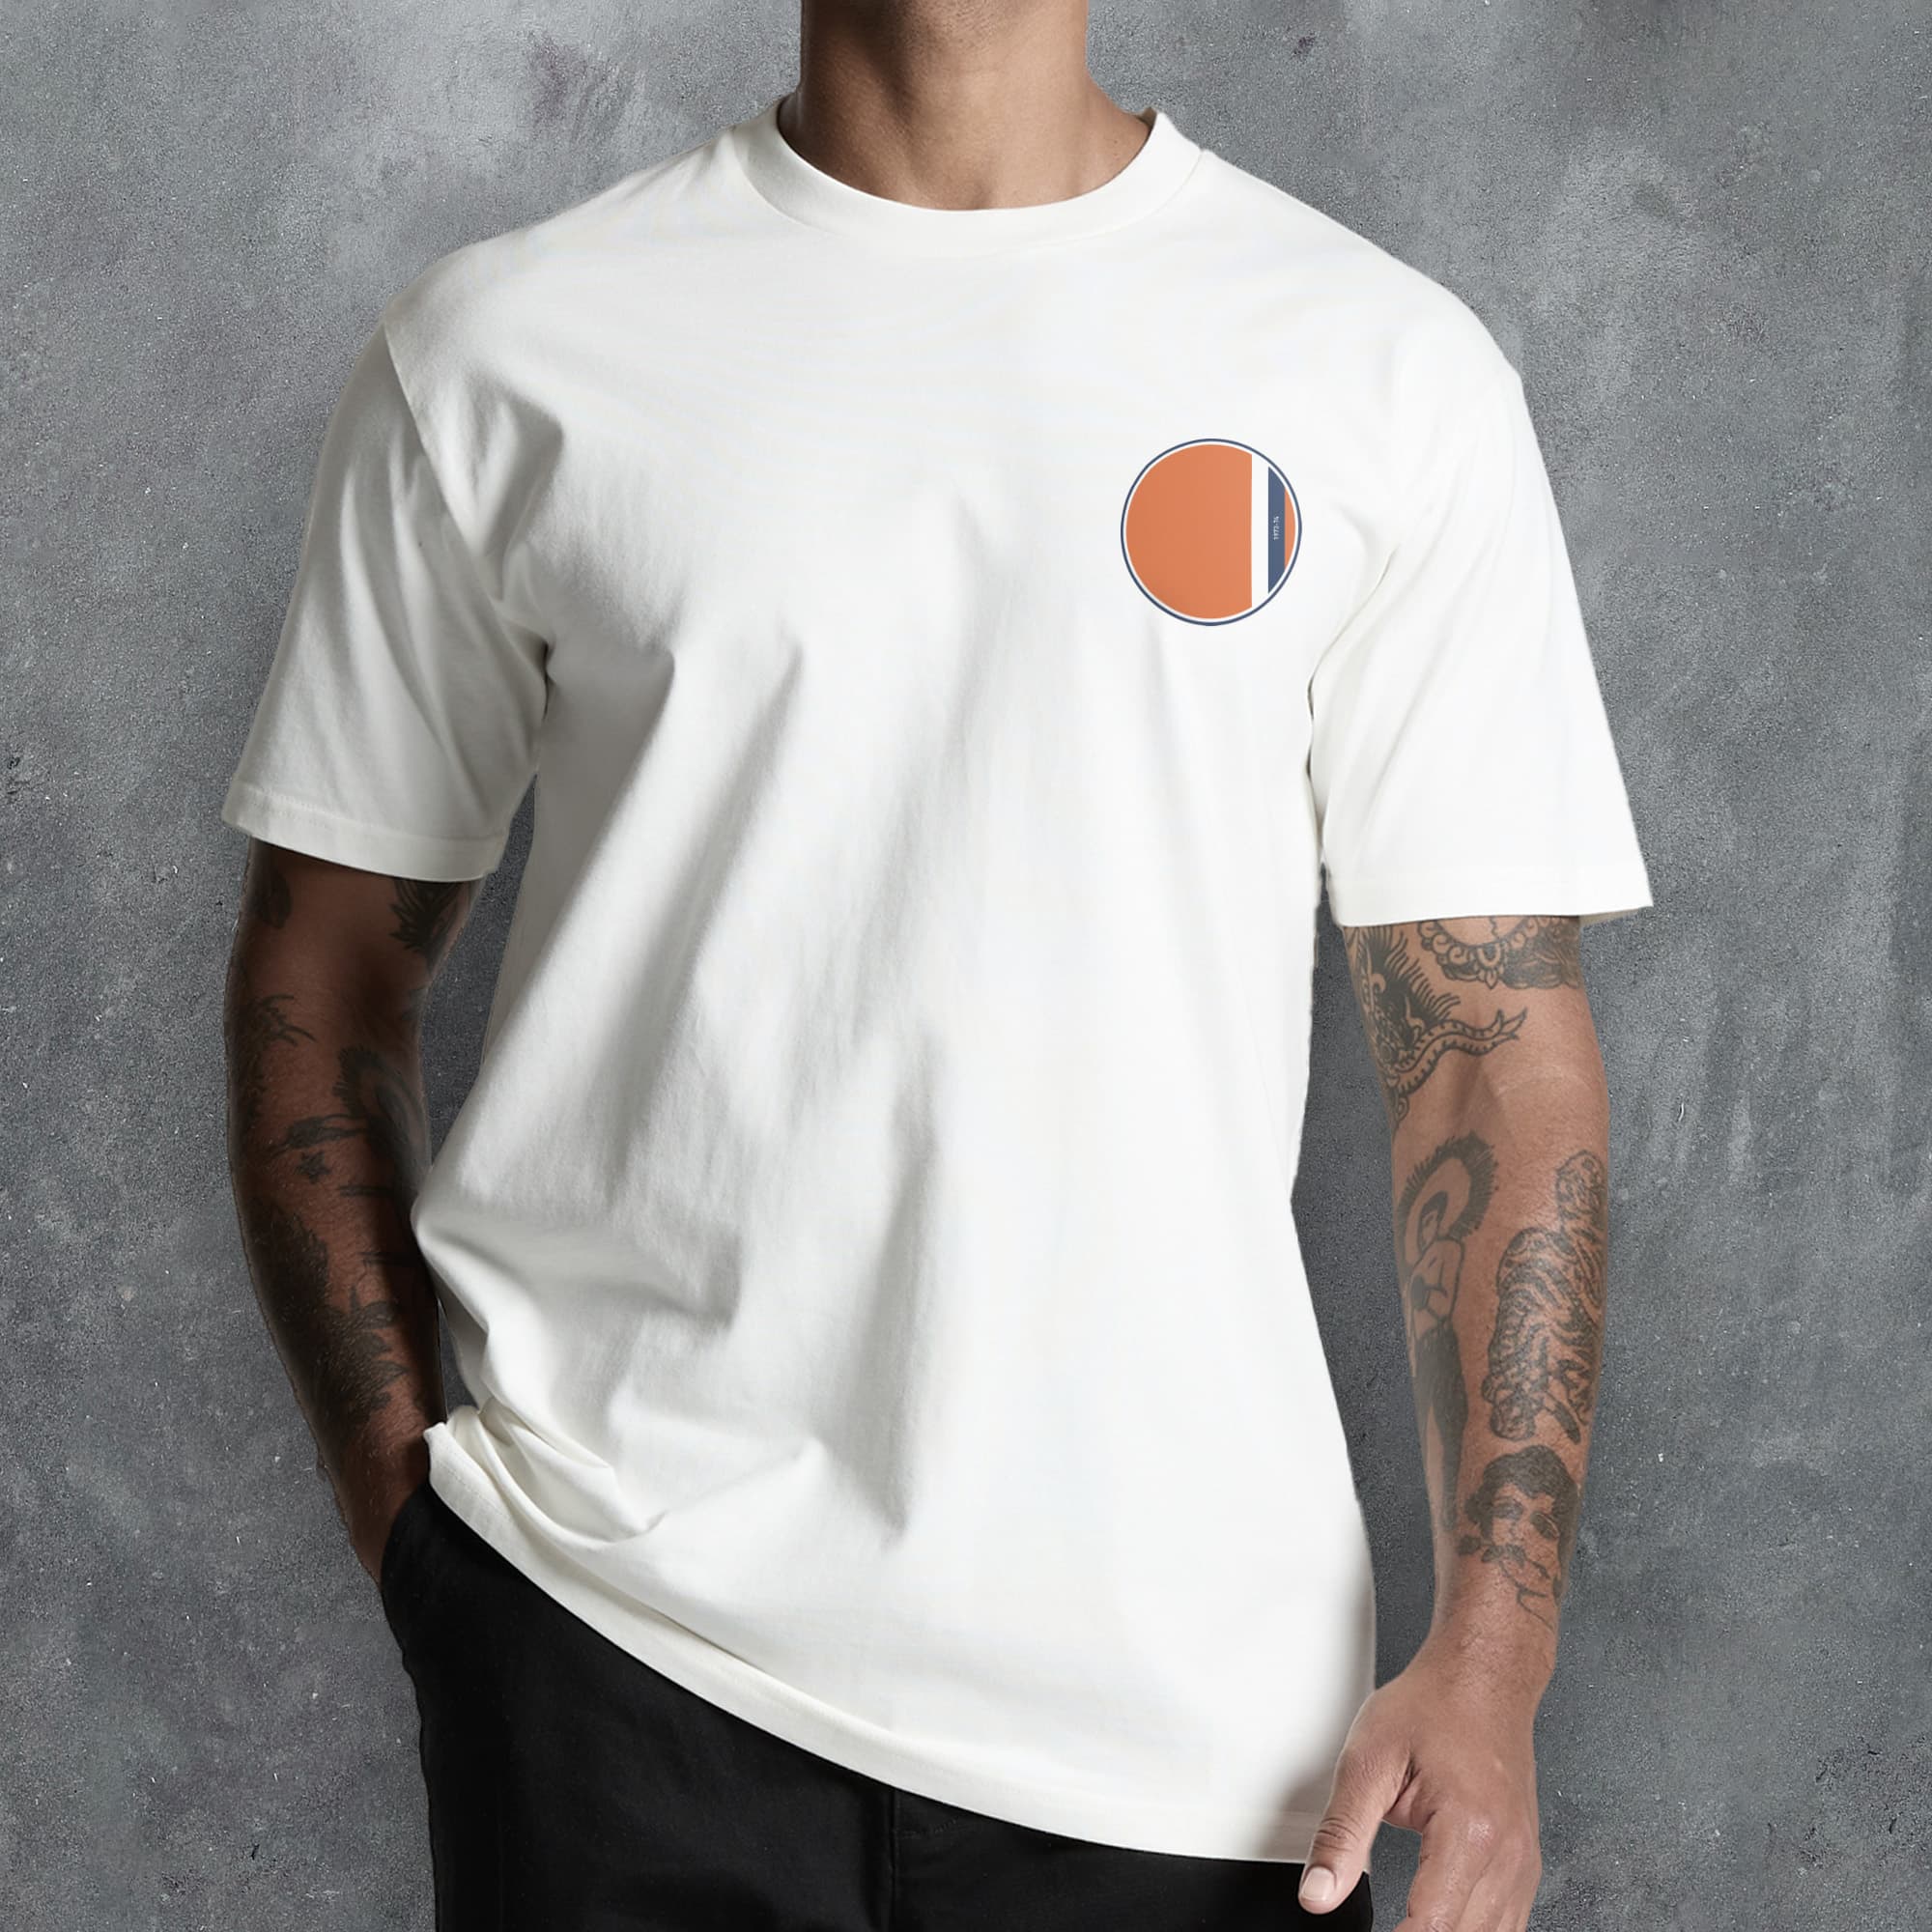 a man wearing a white t - shirt with an orange circle on it